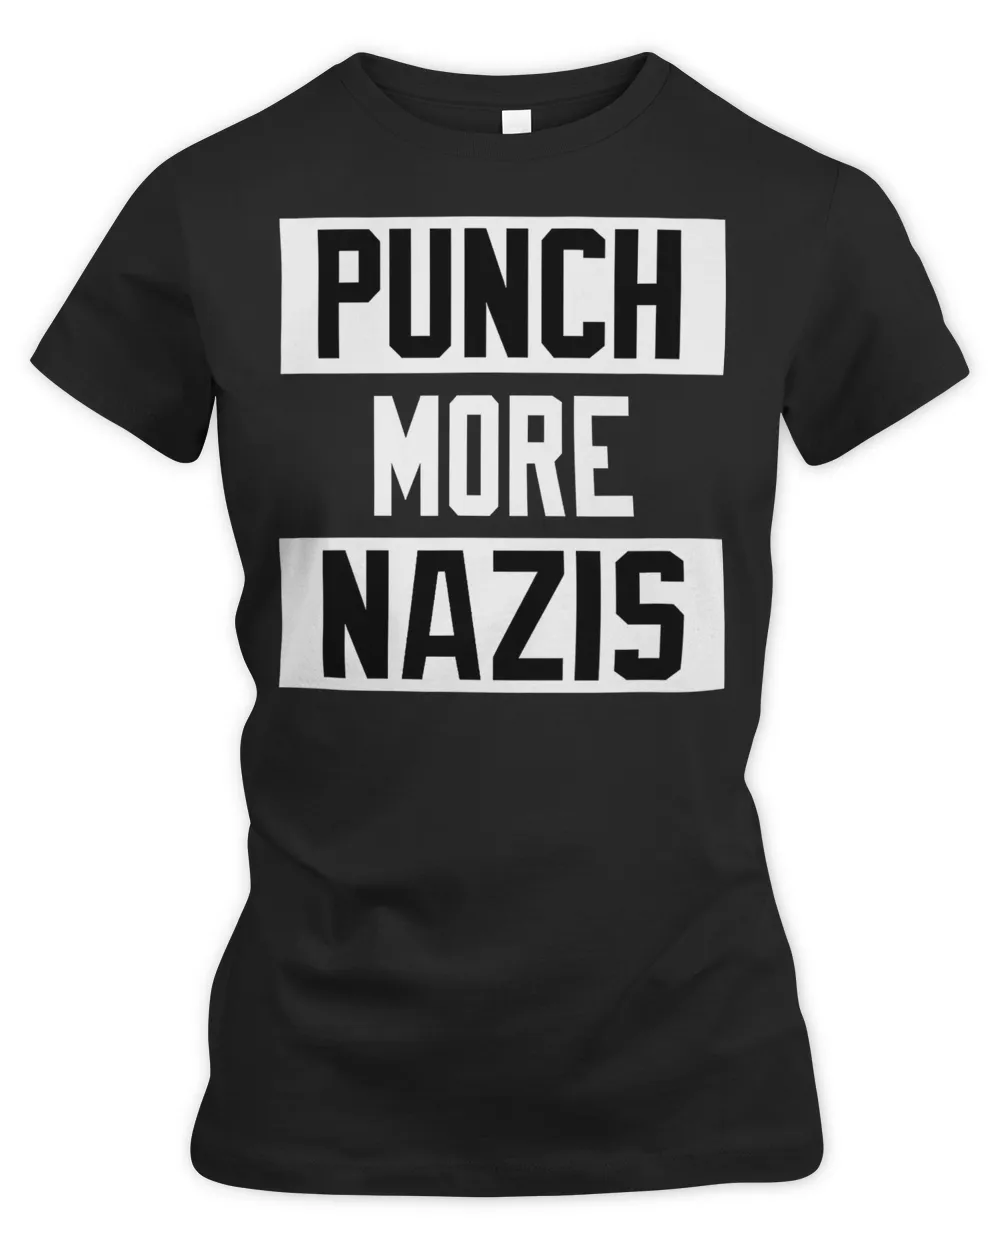 Punch More Nazis Shirt Support Equal Rights Anti-Nazi